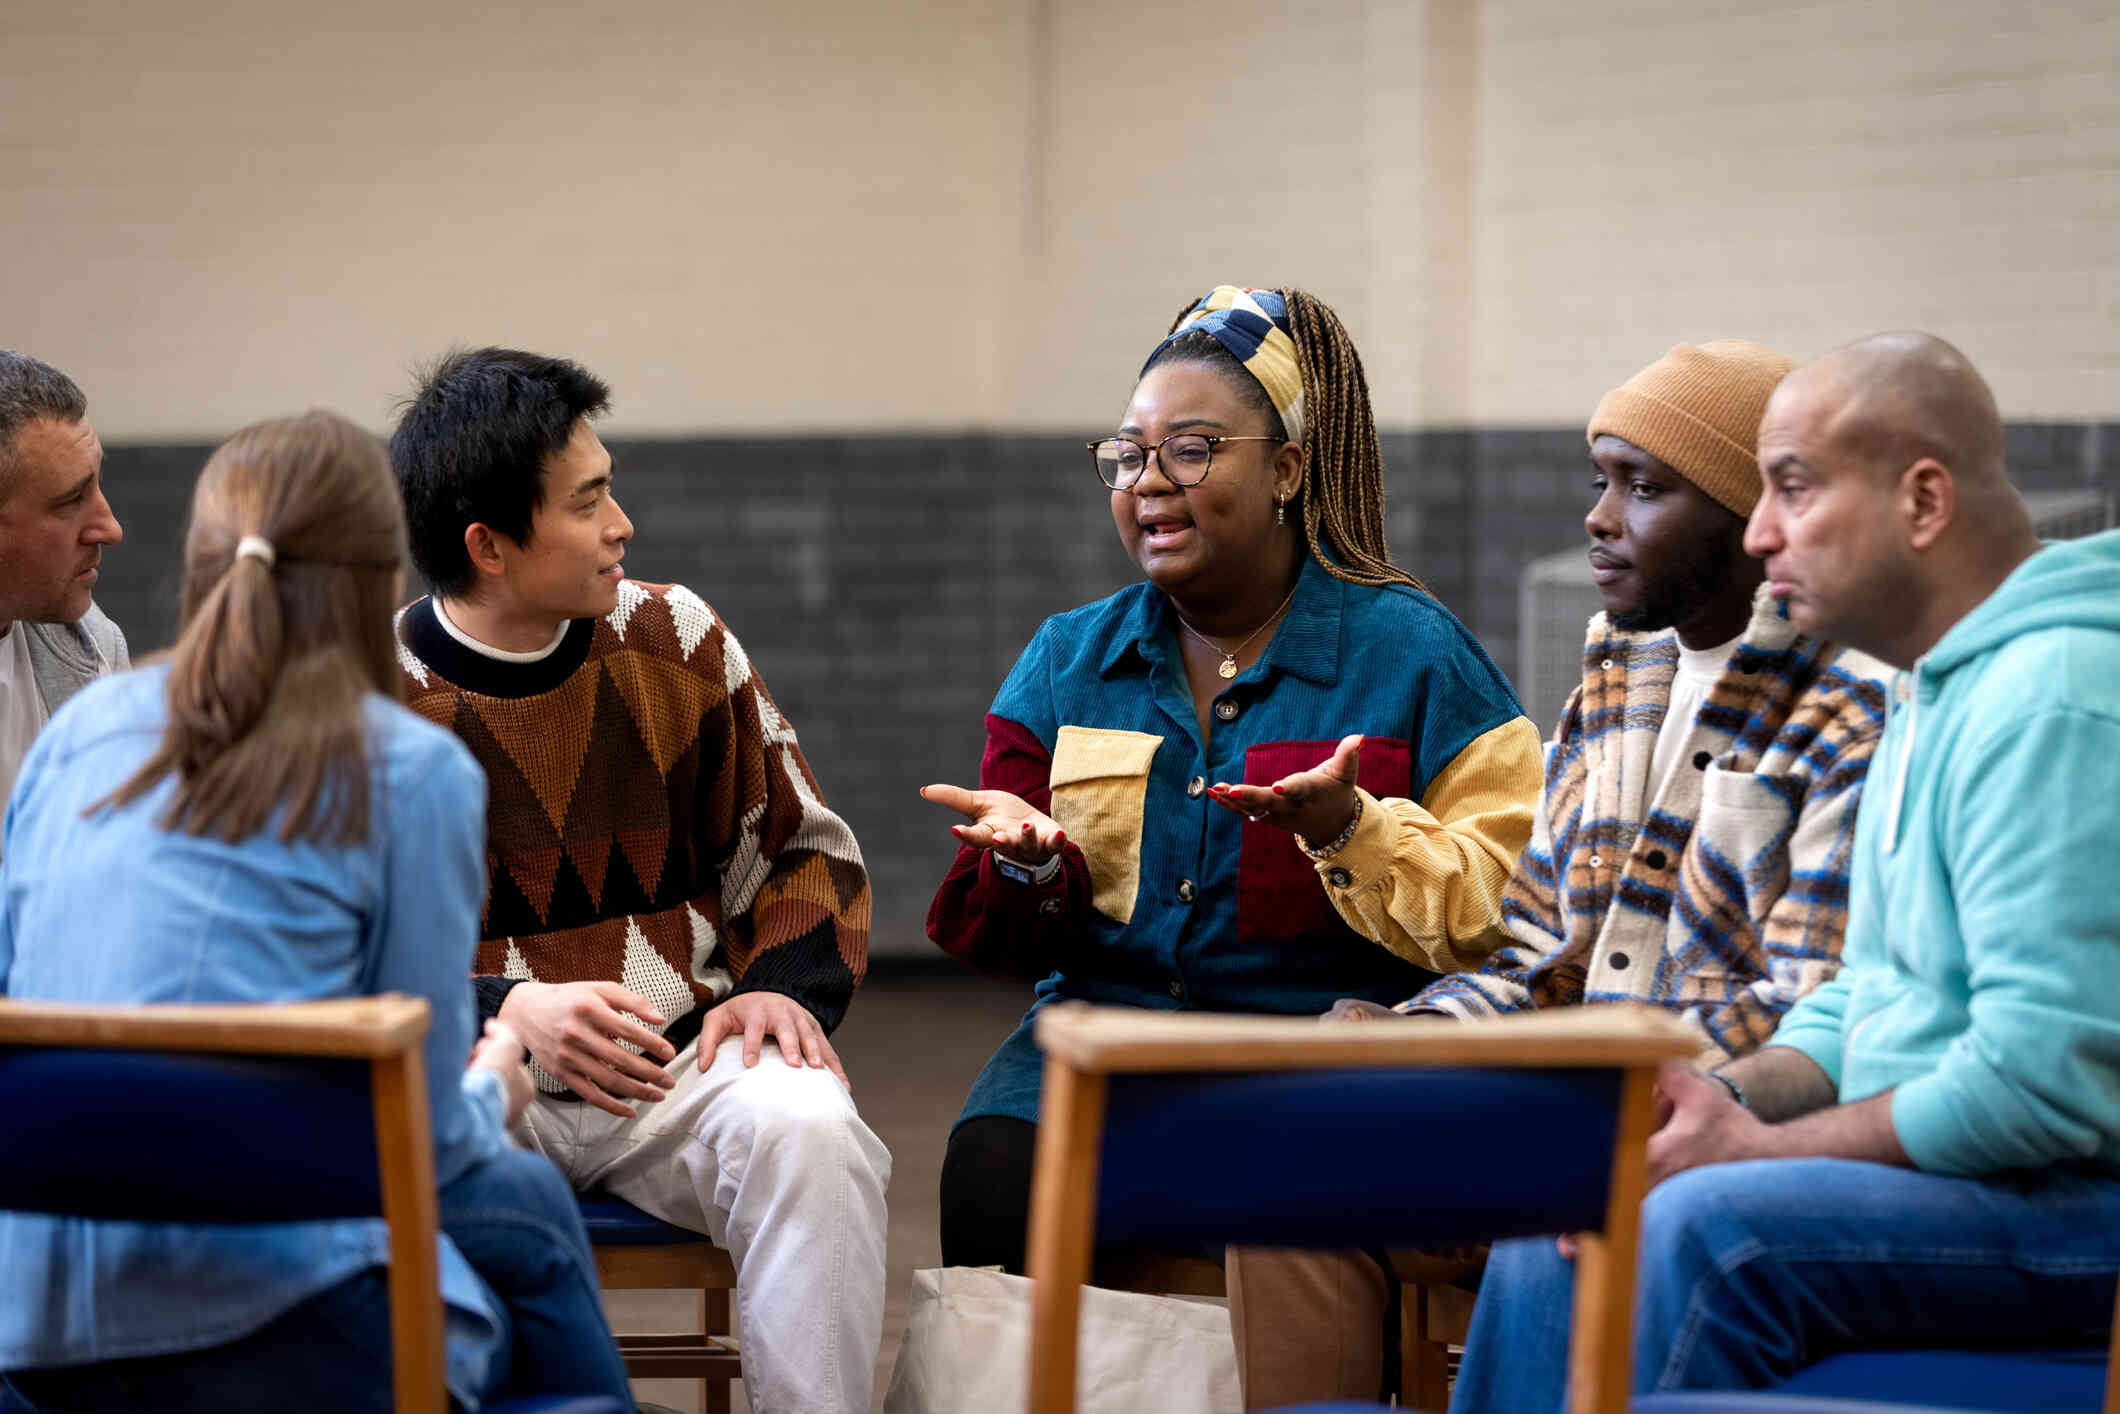 Six adults sit in chairs in a circle during a group therapy session as one woman talks.